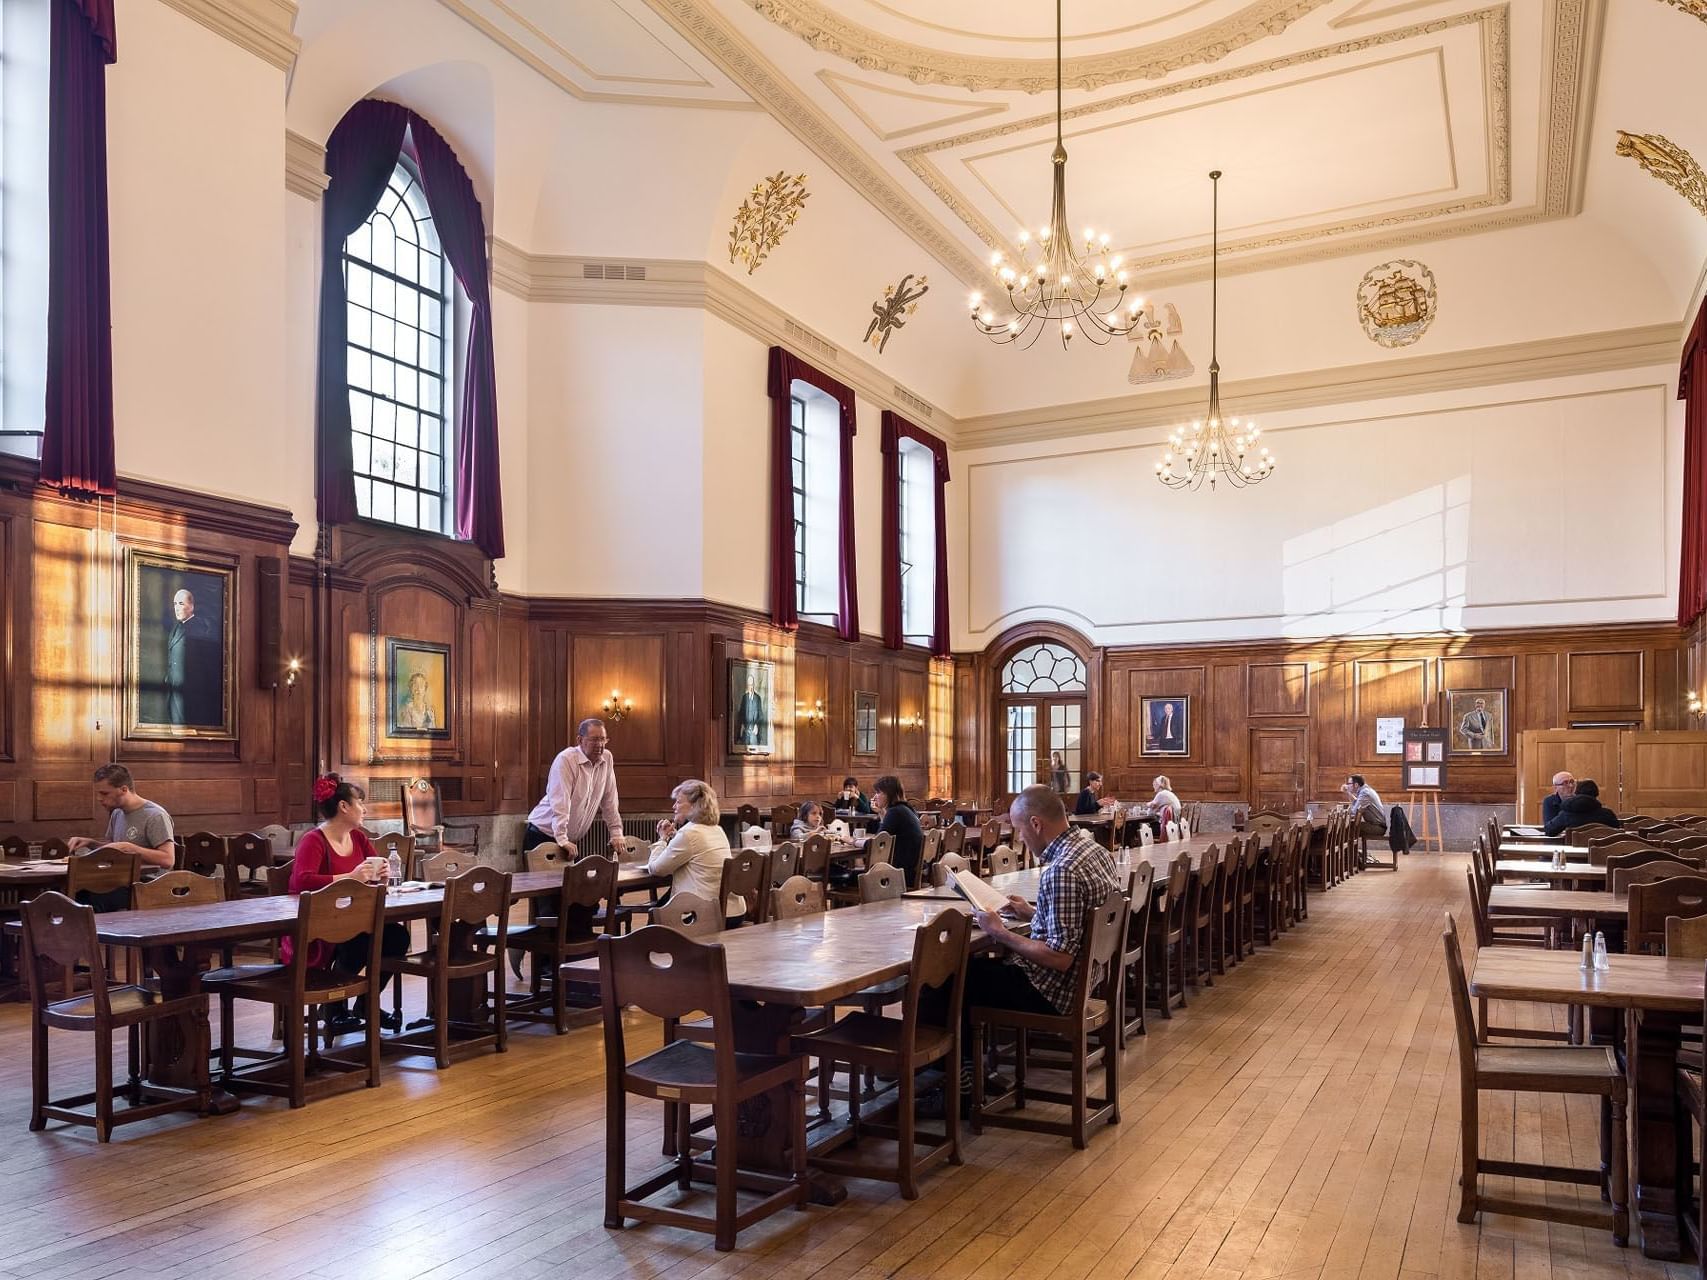 People in Great Hall at The Goodenough Hotel in London